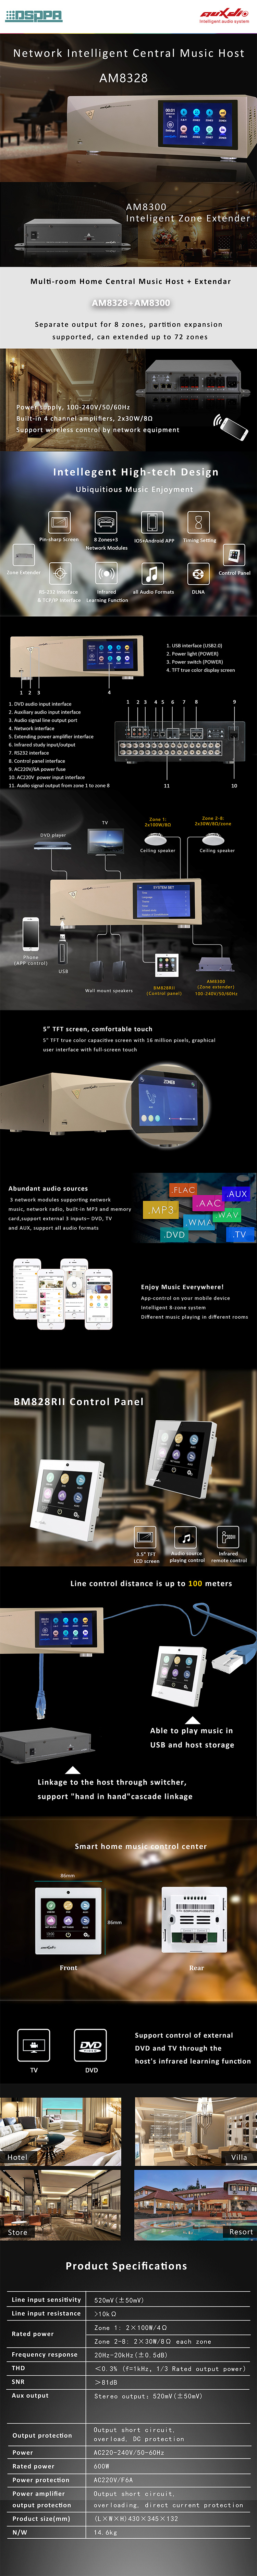 AM8328 Multi-room Home Central Music Host